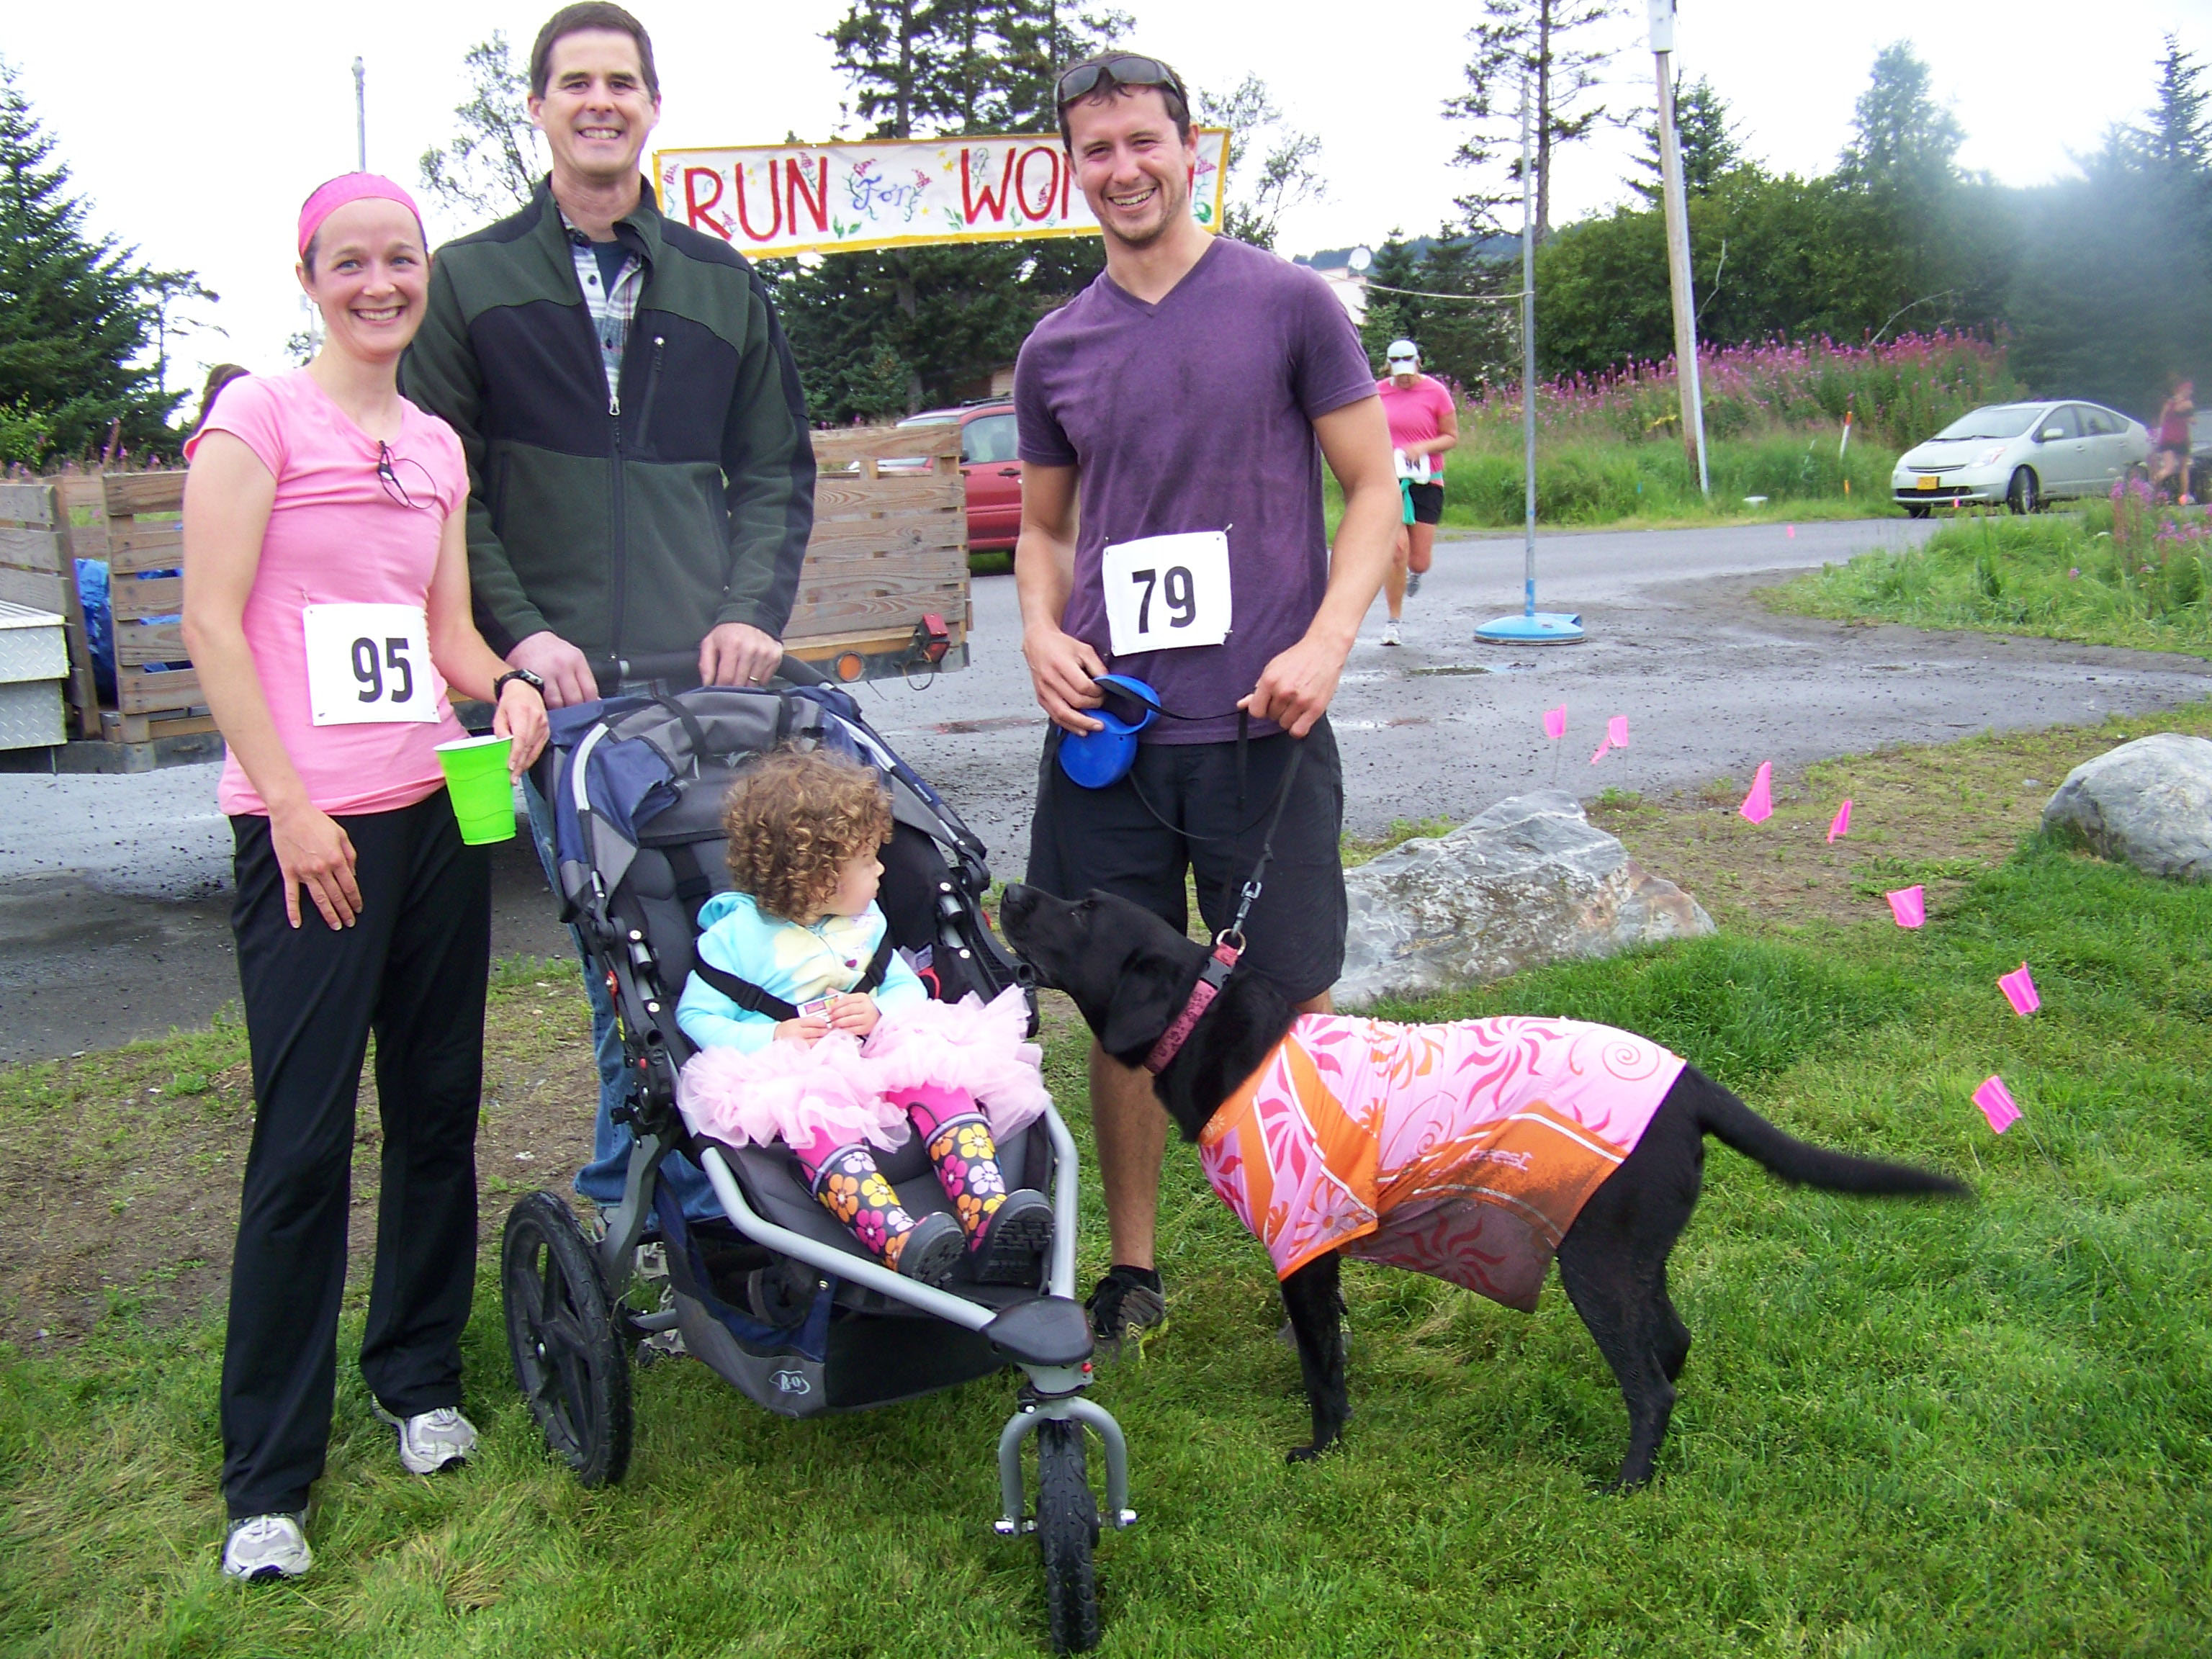 Jeff Williams (center) and Sophia Williams (in stroller) greet runners Brie Drummond, Matt Byrd and Byrd's canine running partner Keala at the end of Sunday's Breast Cancer Run.-Photo by McKibben Jackinsky,  Homer News